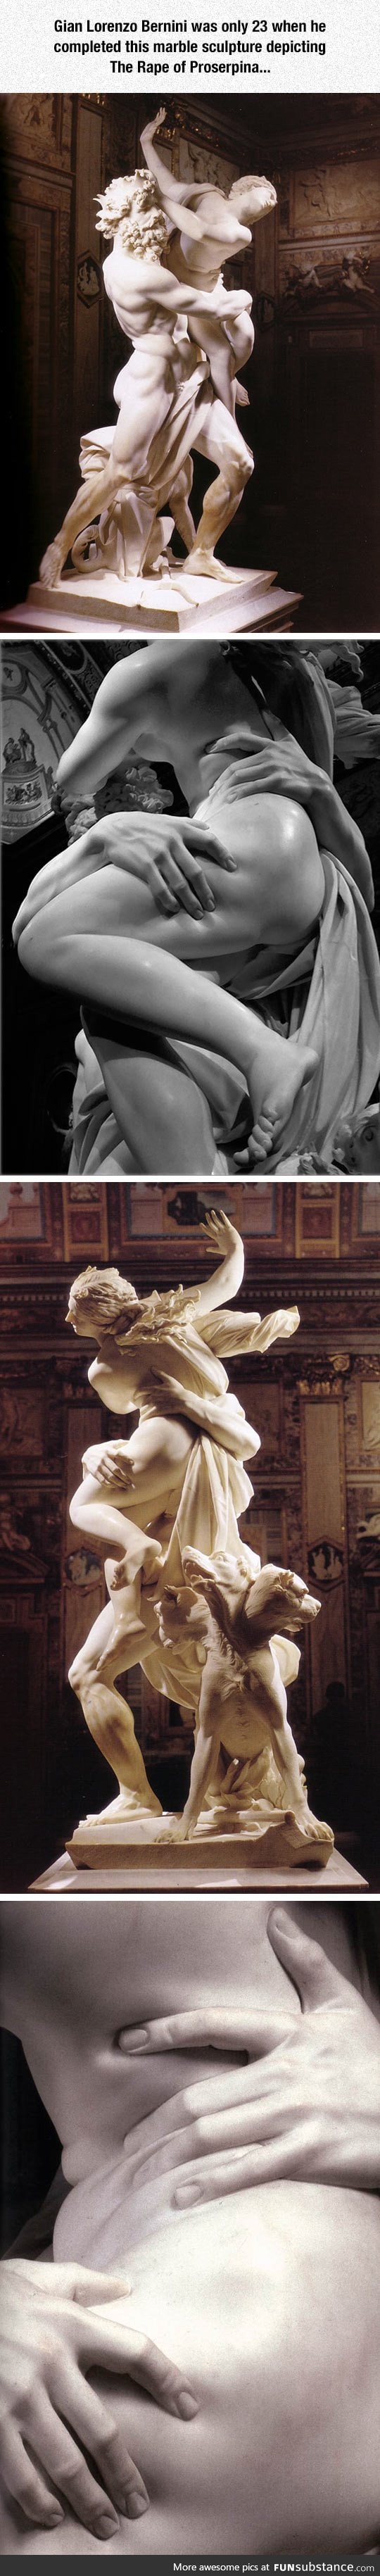 Marble sculpture shows it better than pictures